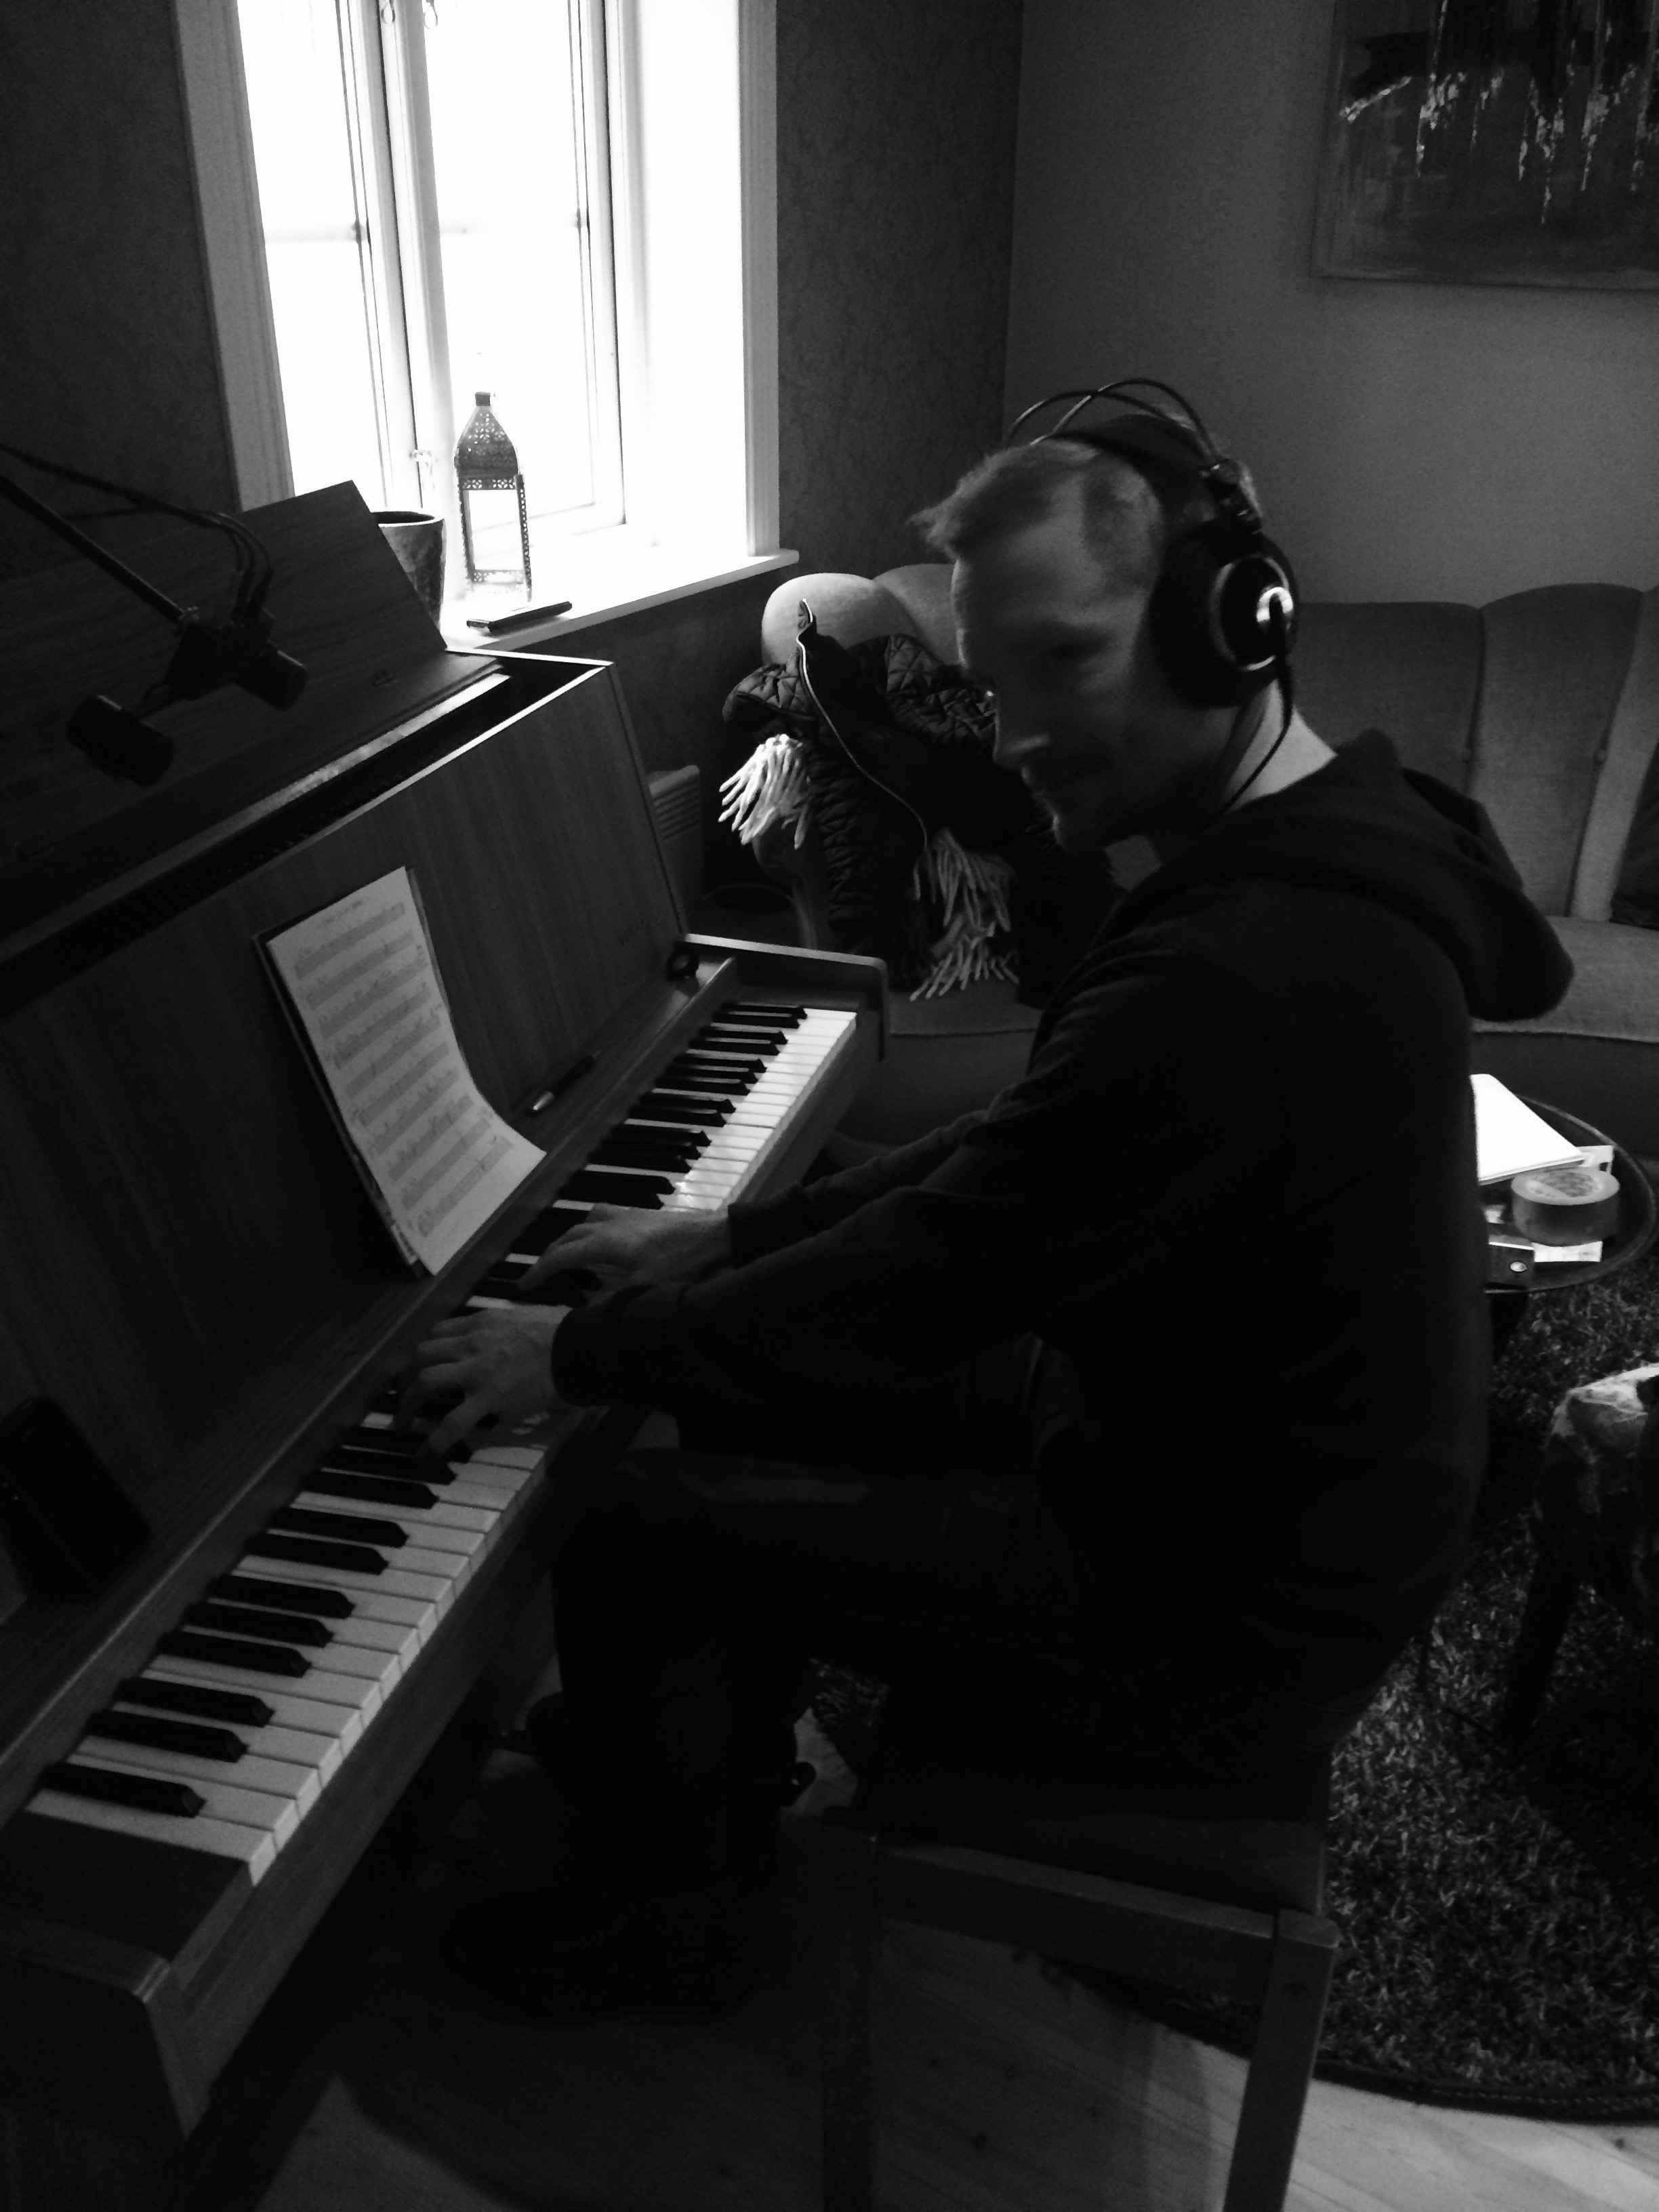  The very first session at Göran Ericsson's Blacklake studio with Daniel Palm on piano 